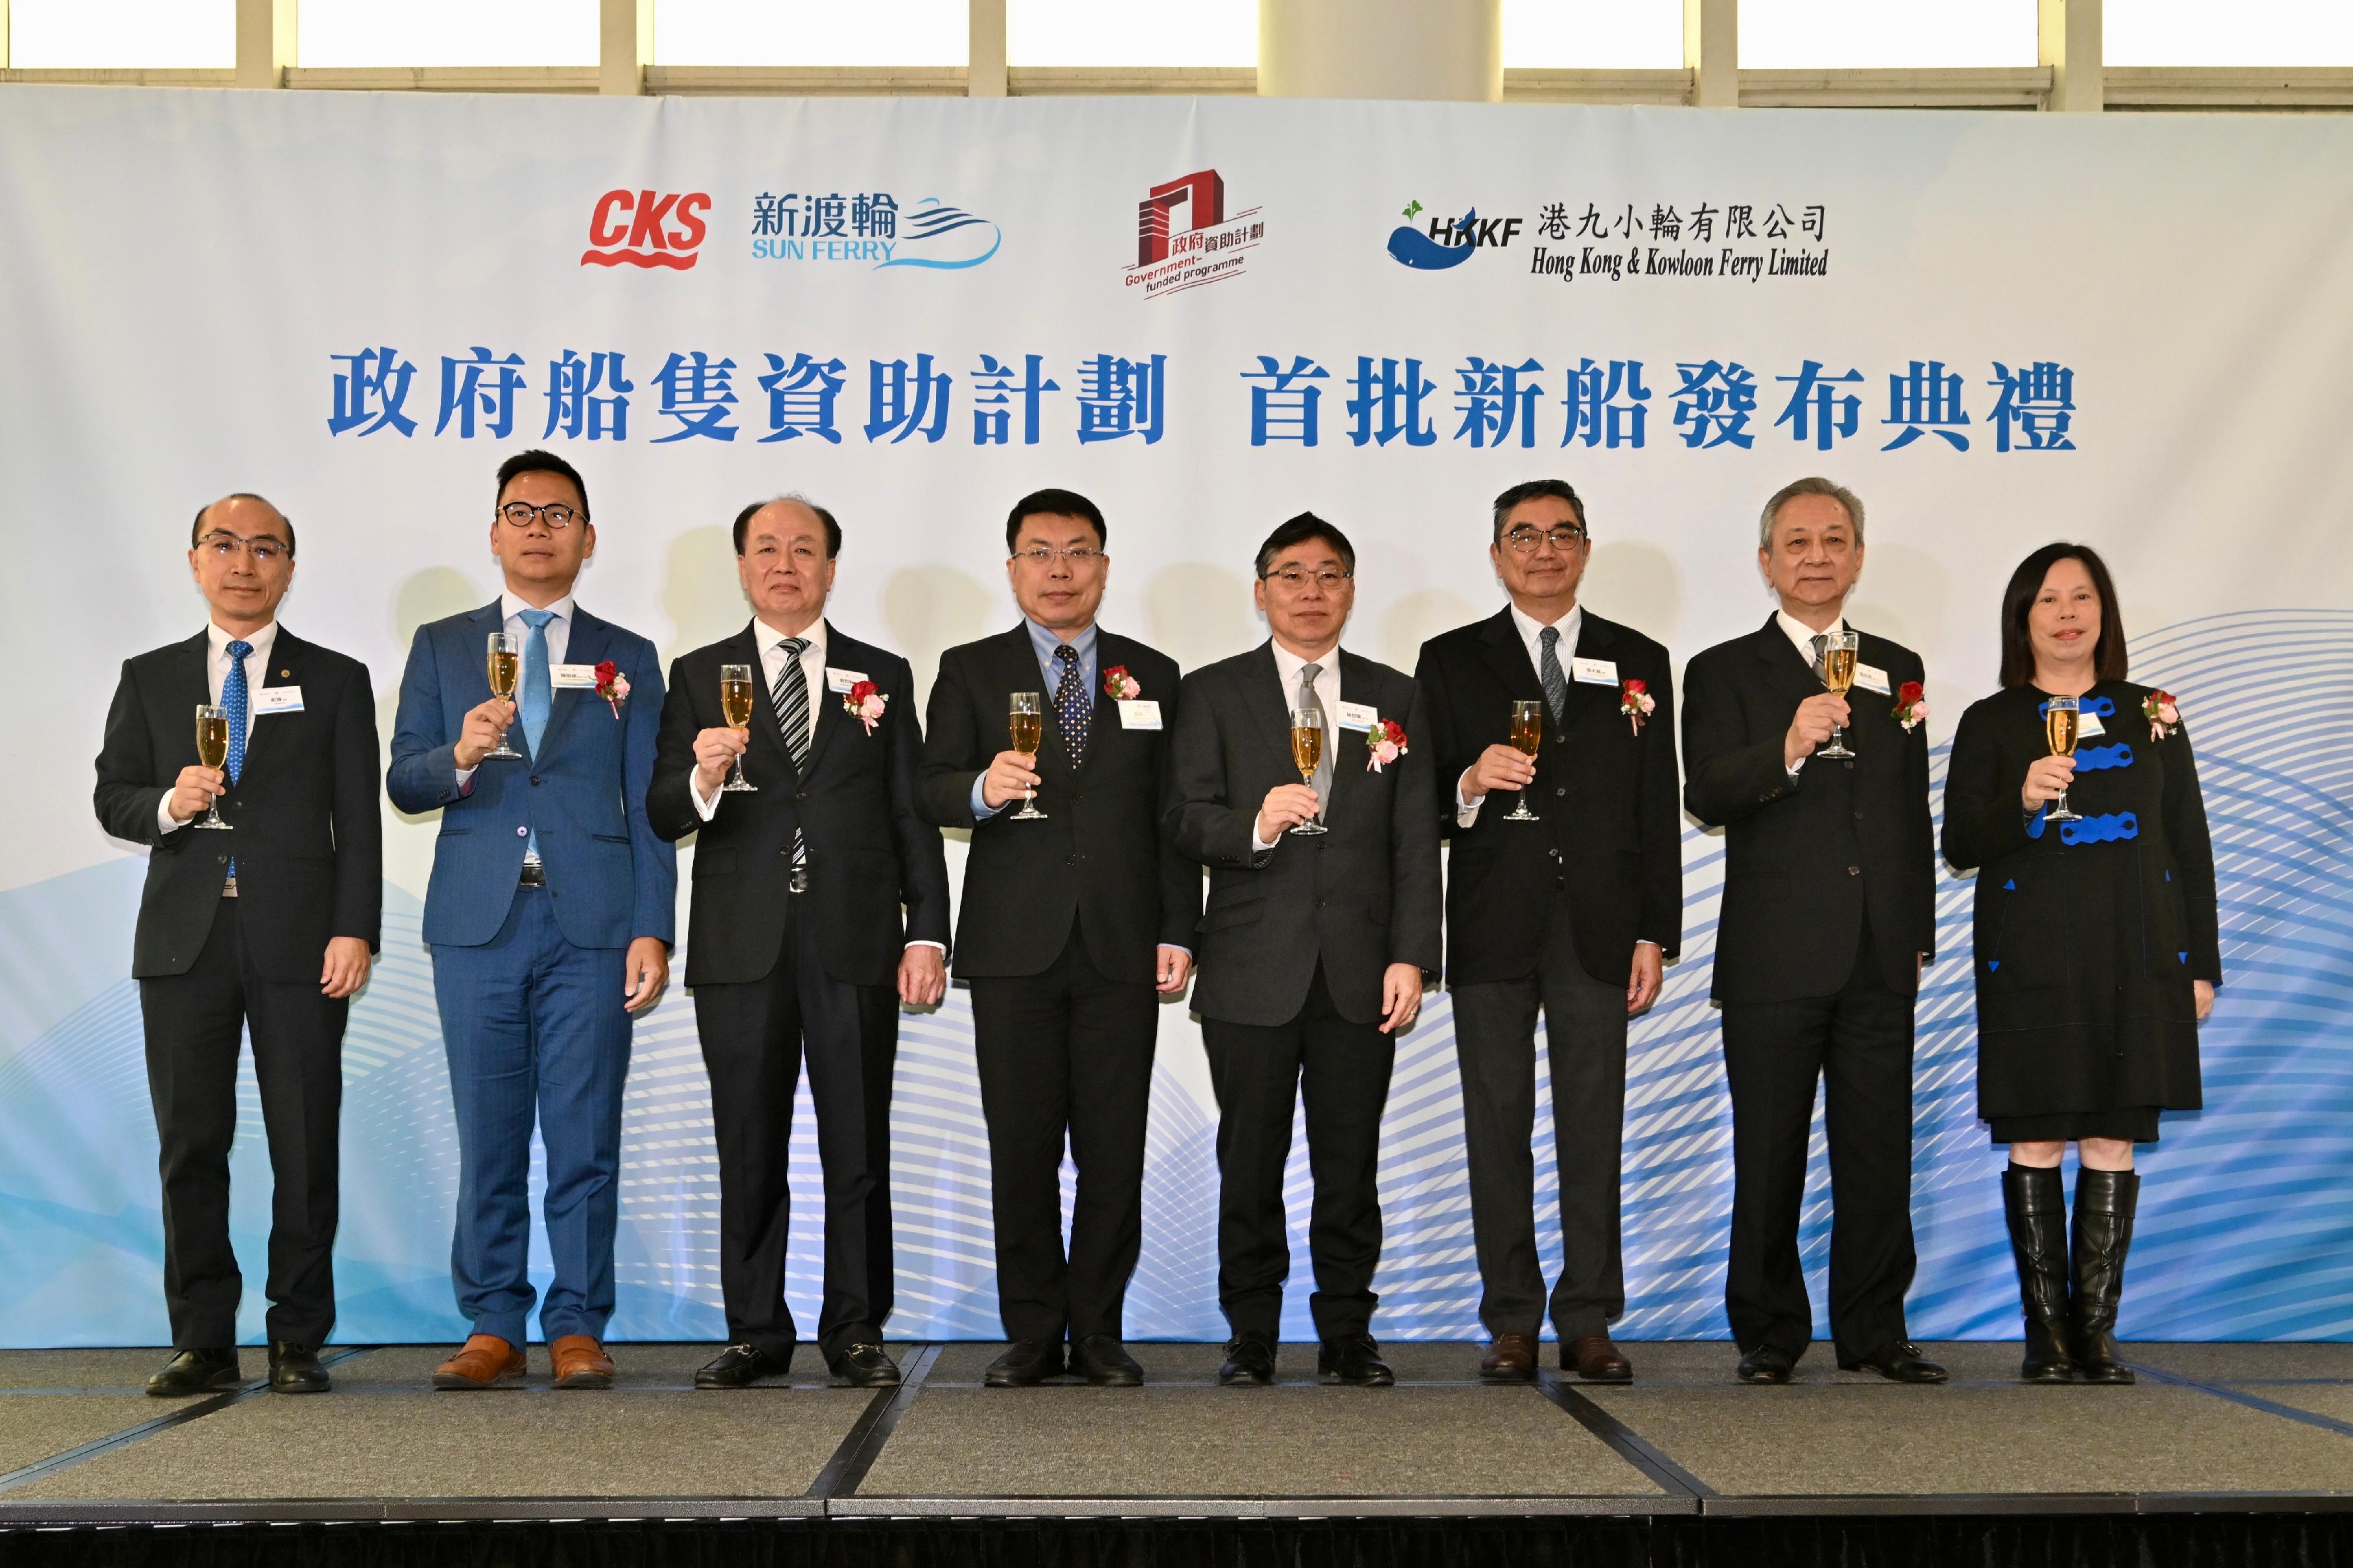 The Transport Department announced today (February 27) that the first batch of three fully government-subsidised new vessels procured under Phase I of the Vessel Subsidy Scheme will be gradually deployed to provide services from March this year. Photo shows the Secretary for Transport and Logistics, Mr Lam Sai-hung (fourth right); Deputy Director-General of the Department of Economic Affairs of the Liaison Office of the Central People's Government in the Hong Kong Special Administrative Region Mr Lyu Feng (fourth left); the Deputy Commissioner for Transport (Transport Services and Management), Ms Macella Lee (first right); the Deputy Director of Marine, Mr Shi Qiang (first left); the Chairman of the Legislative Council Panel on Transport, Mr Chan Han-pan (second left); Member of the Legislative Council for the Transport Functional Constituency, Mr Frankie Yick (second right), and representatives from the Sun Ferry Services Company Limited and Hong Kong and Kowloon Ferry Limited at the launching ceremony of the new vessels.